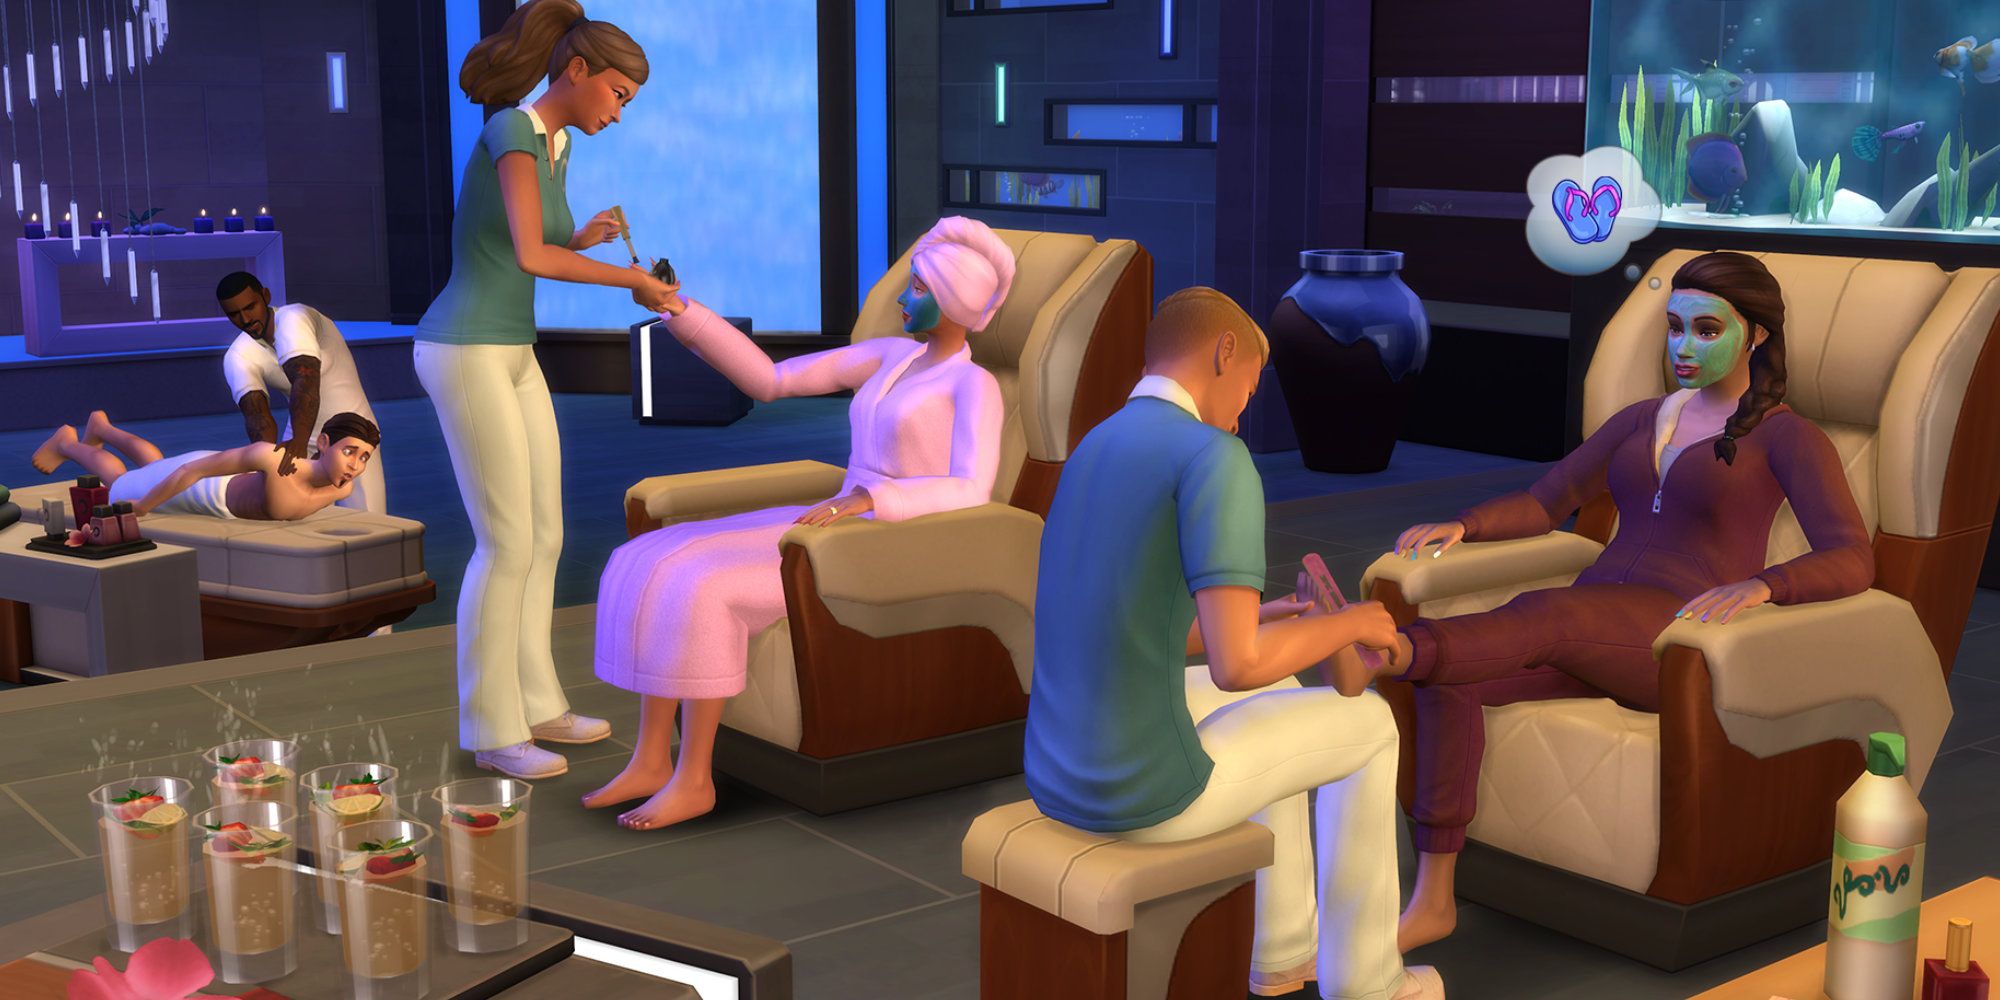 Sims 4 spa day manicures and pedicures alongside a massage